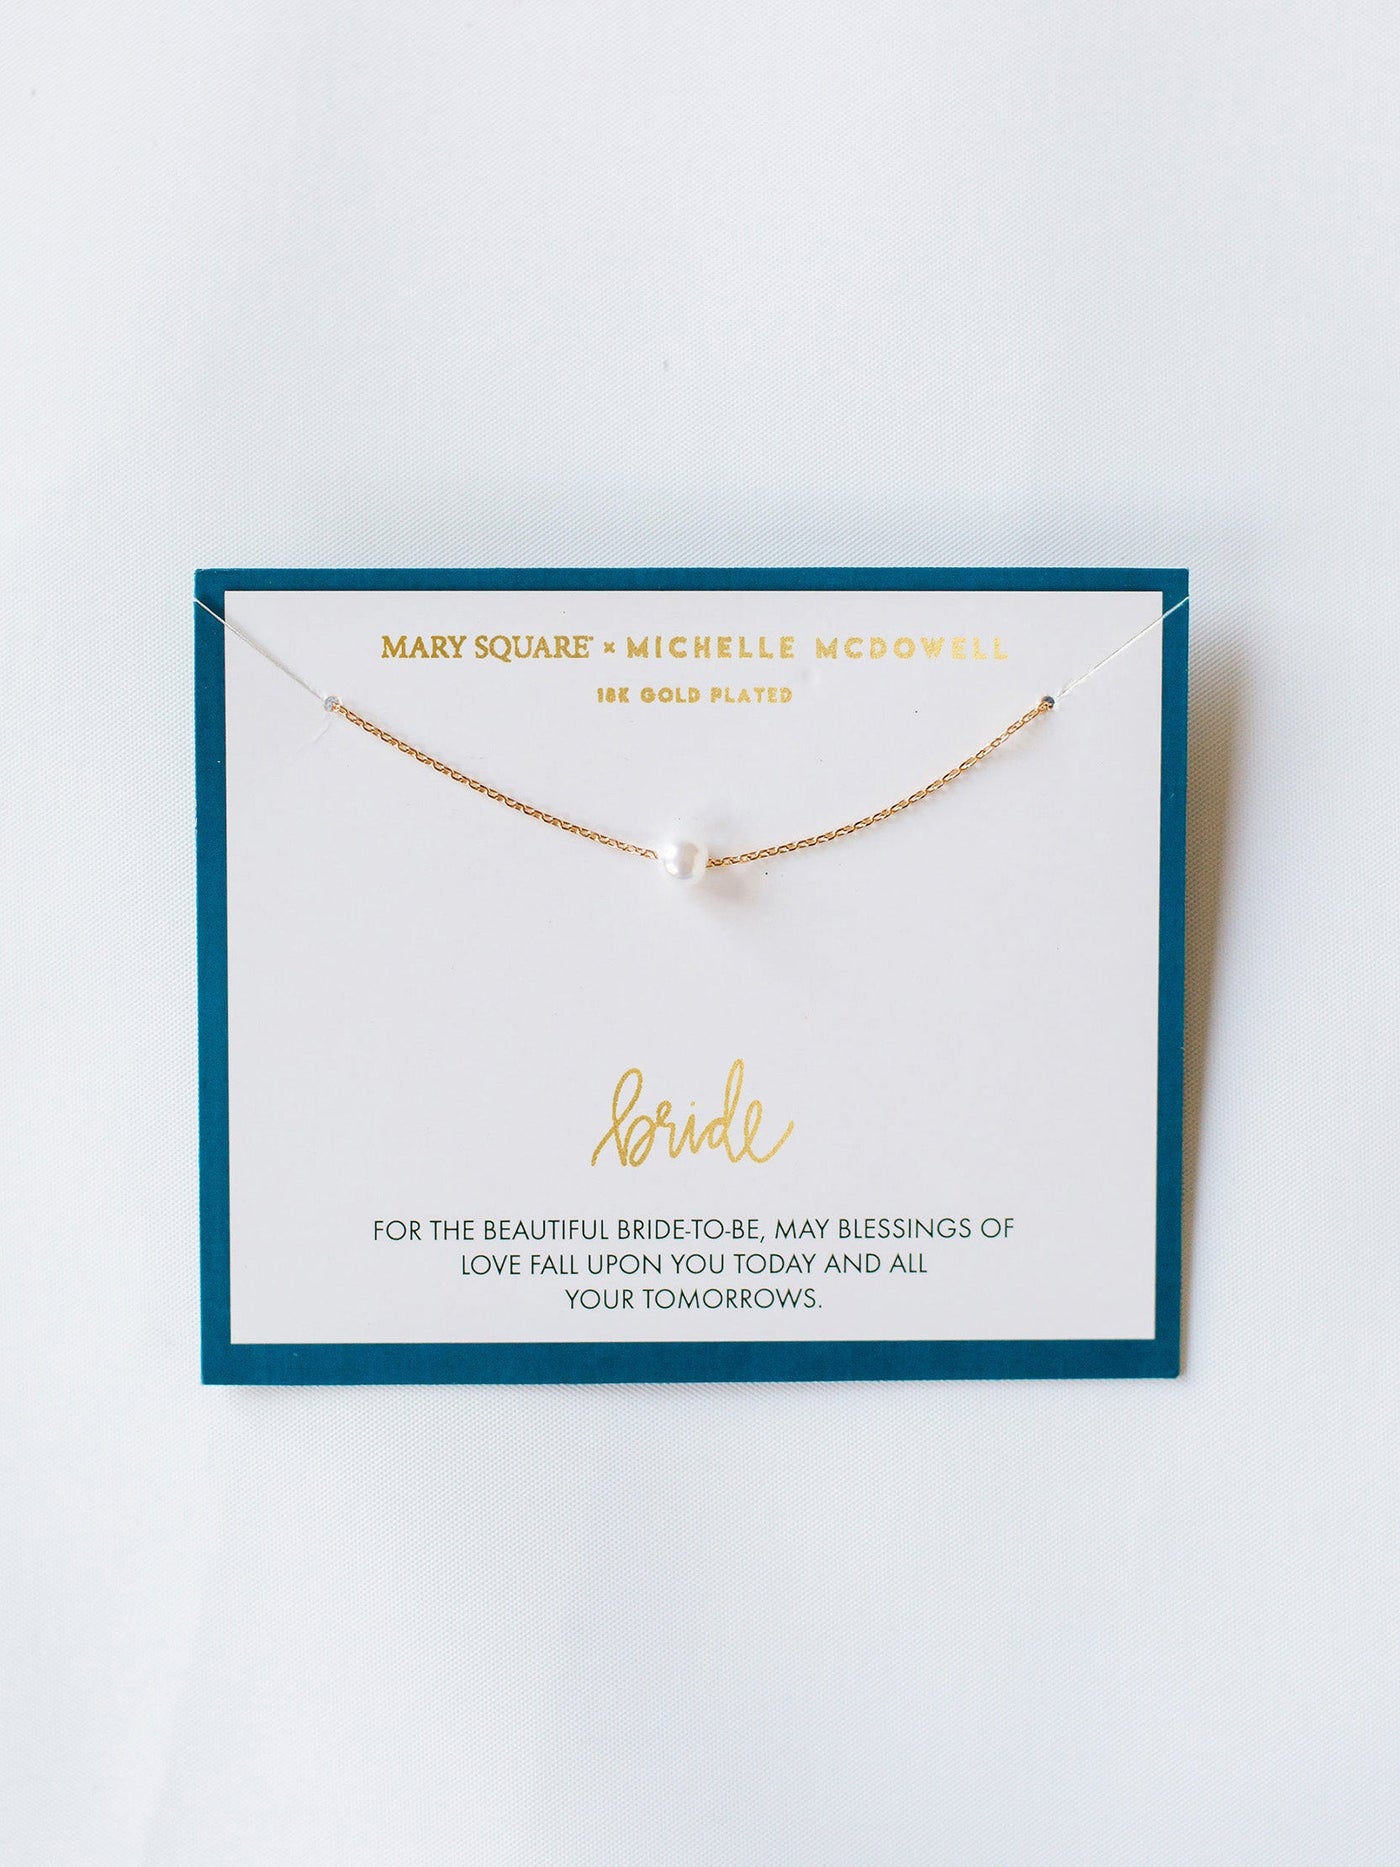 Bride Necklace - Mary Square, LLC